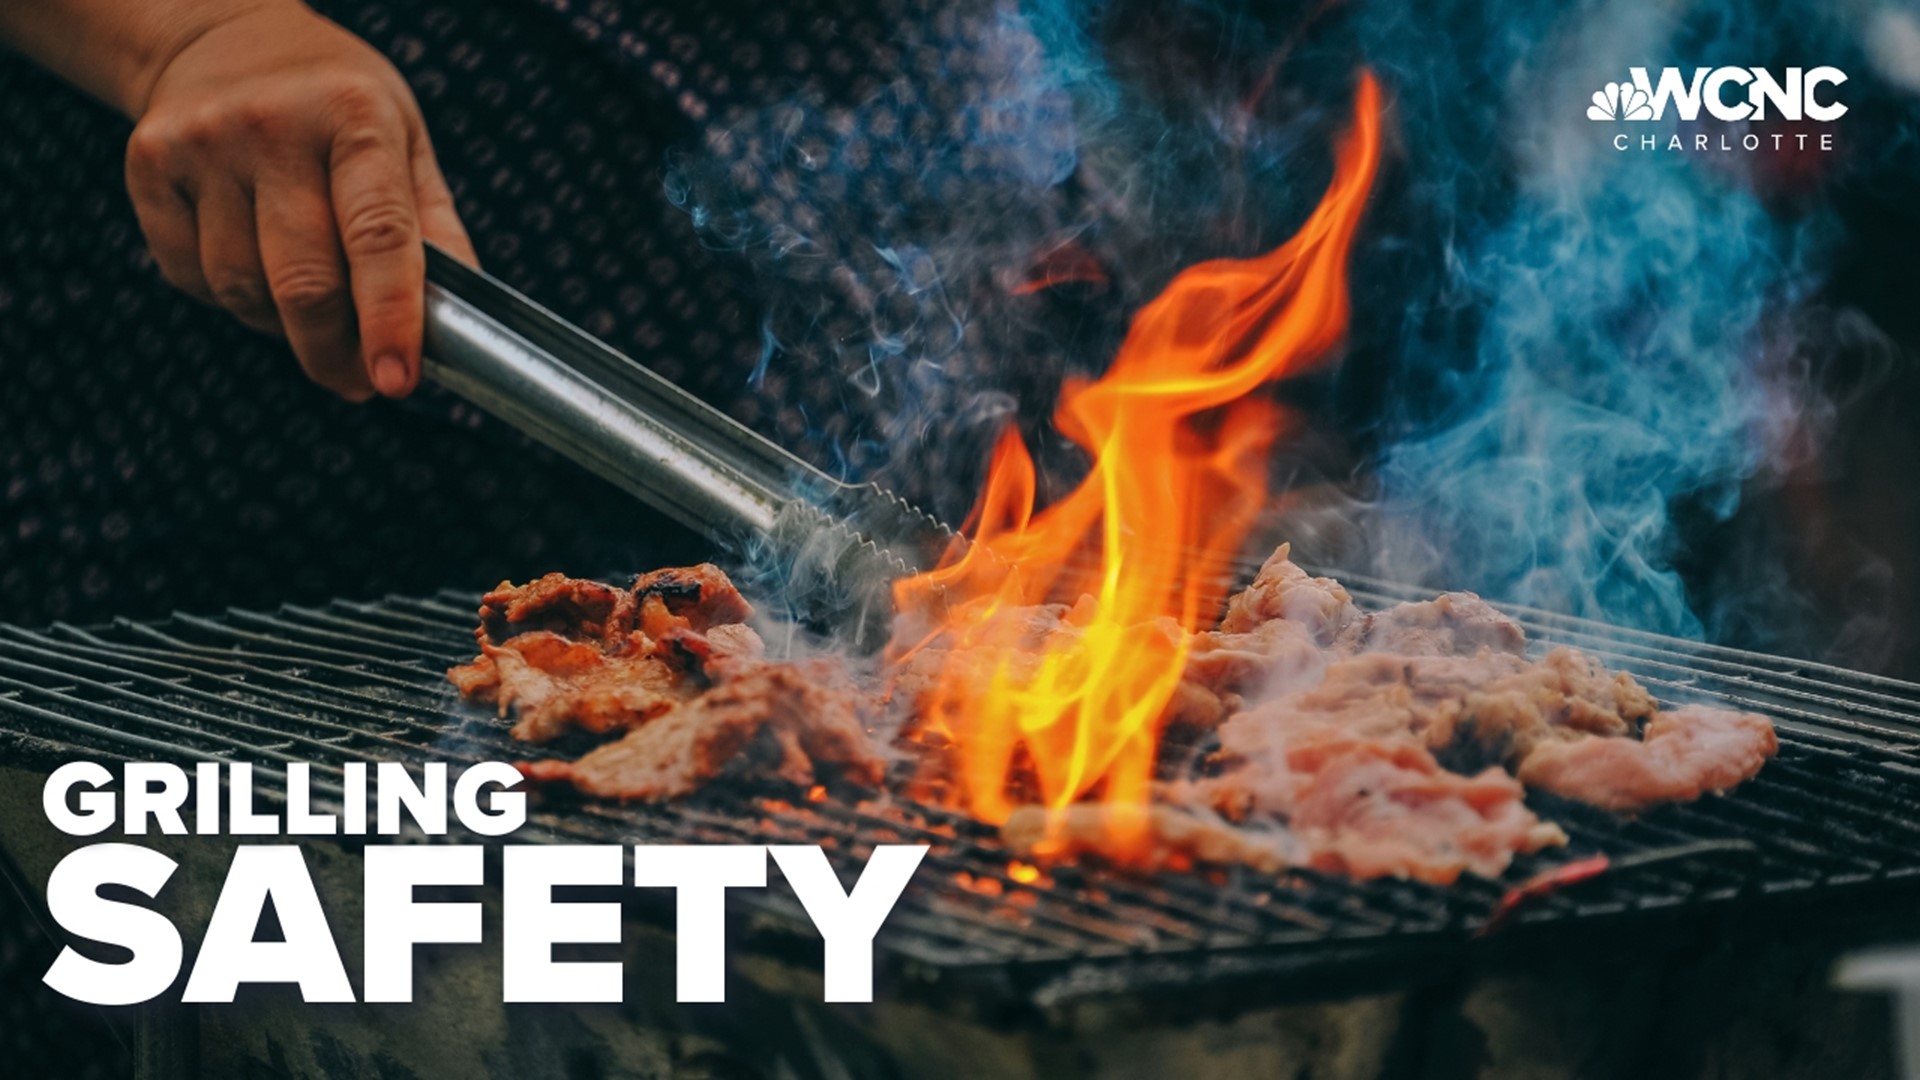 For those firing up the grill, the National Fire Protection Association (NFPA) has some tips to keep safe.